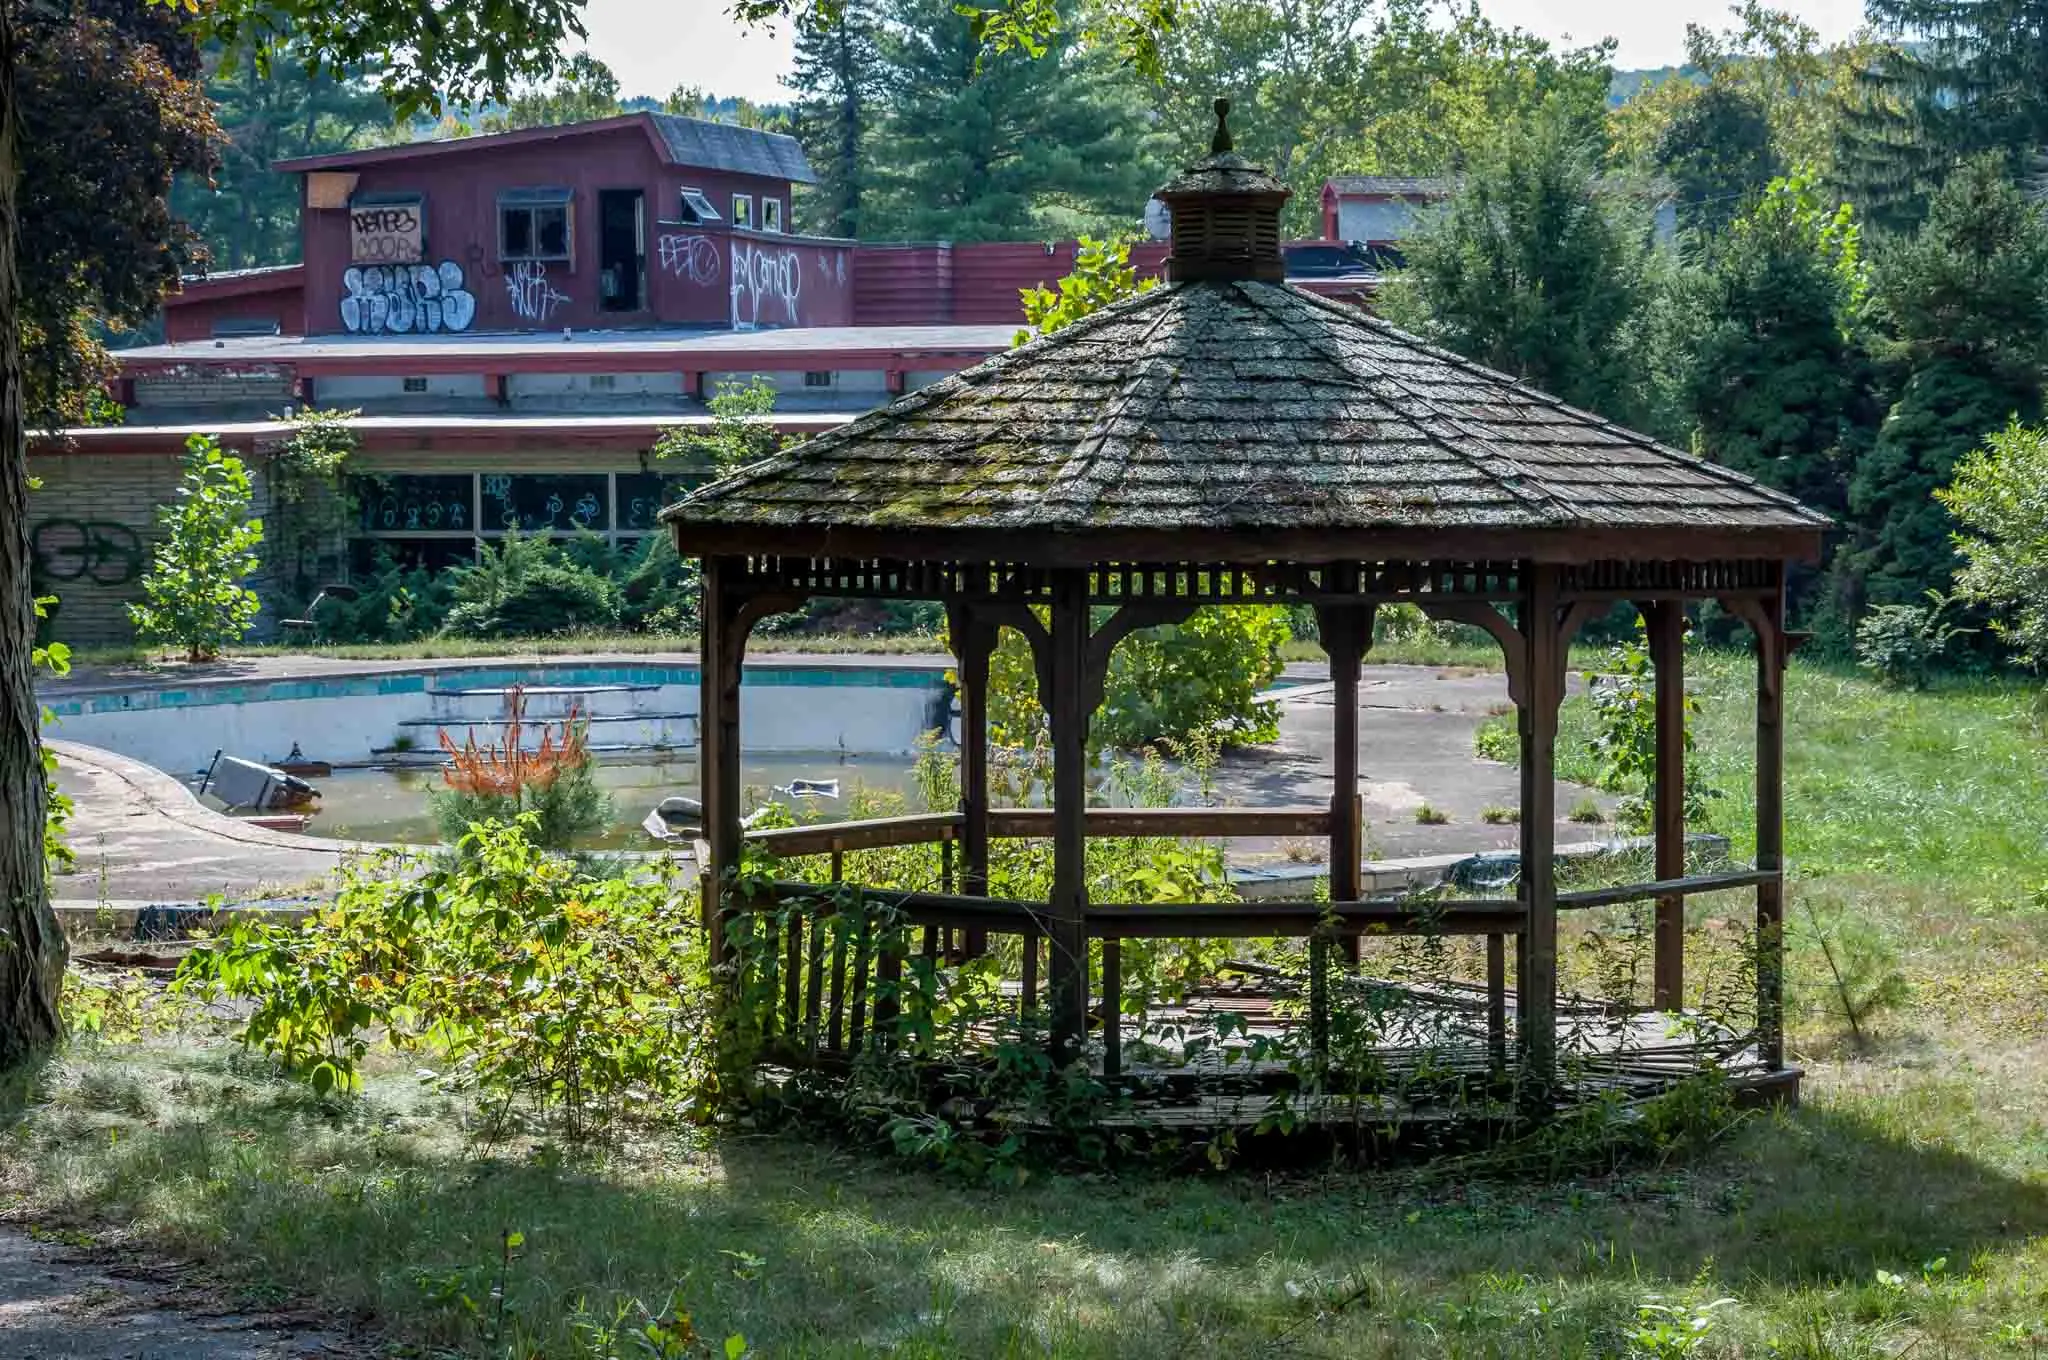 A gazebo at one of the abandoned resorts in Pennsylvania